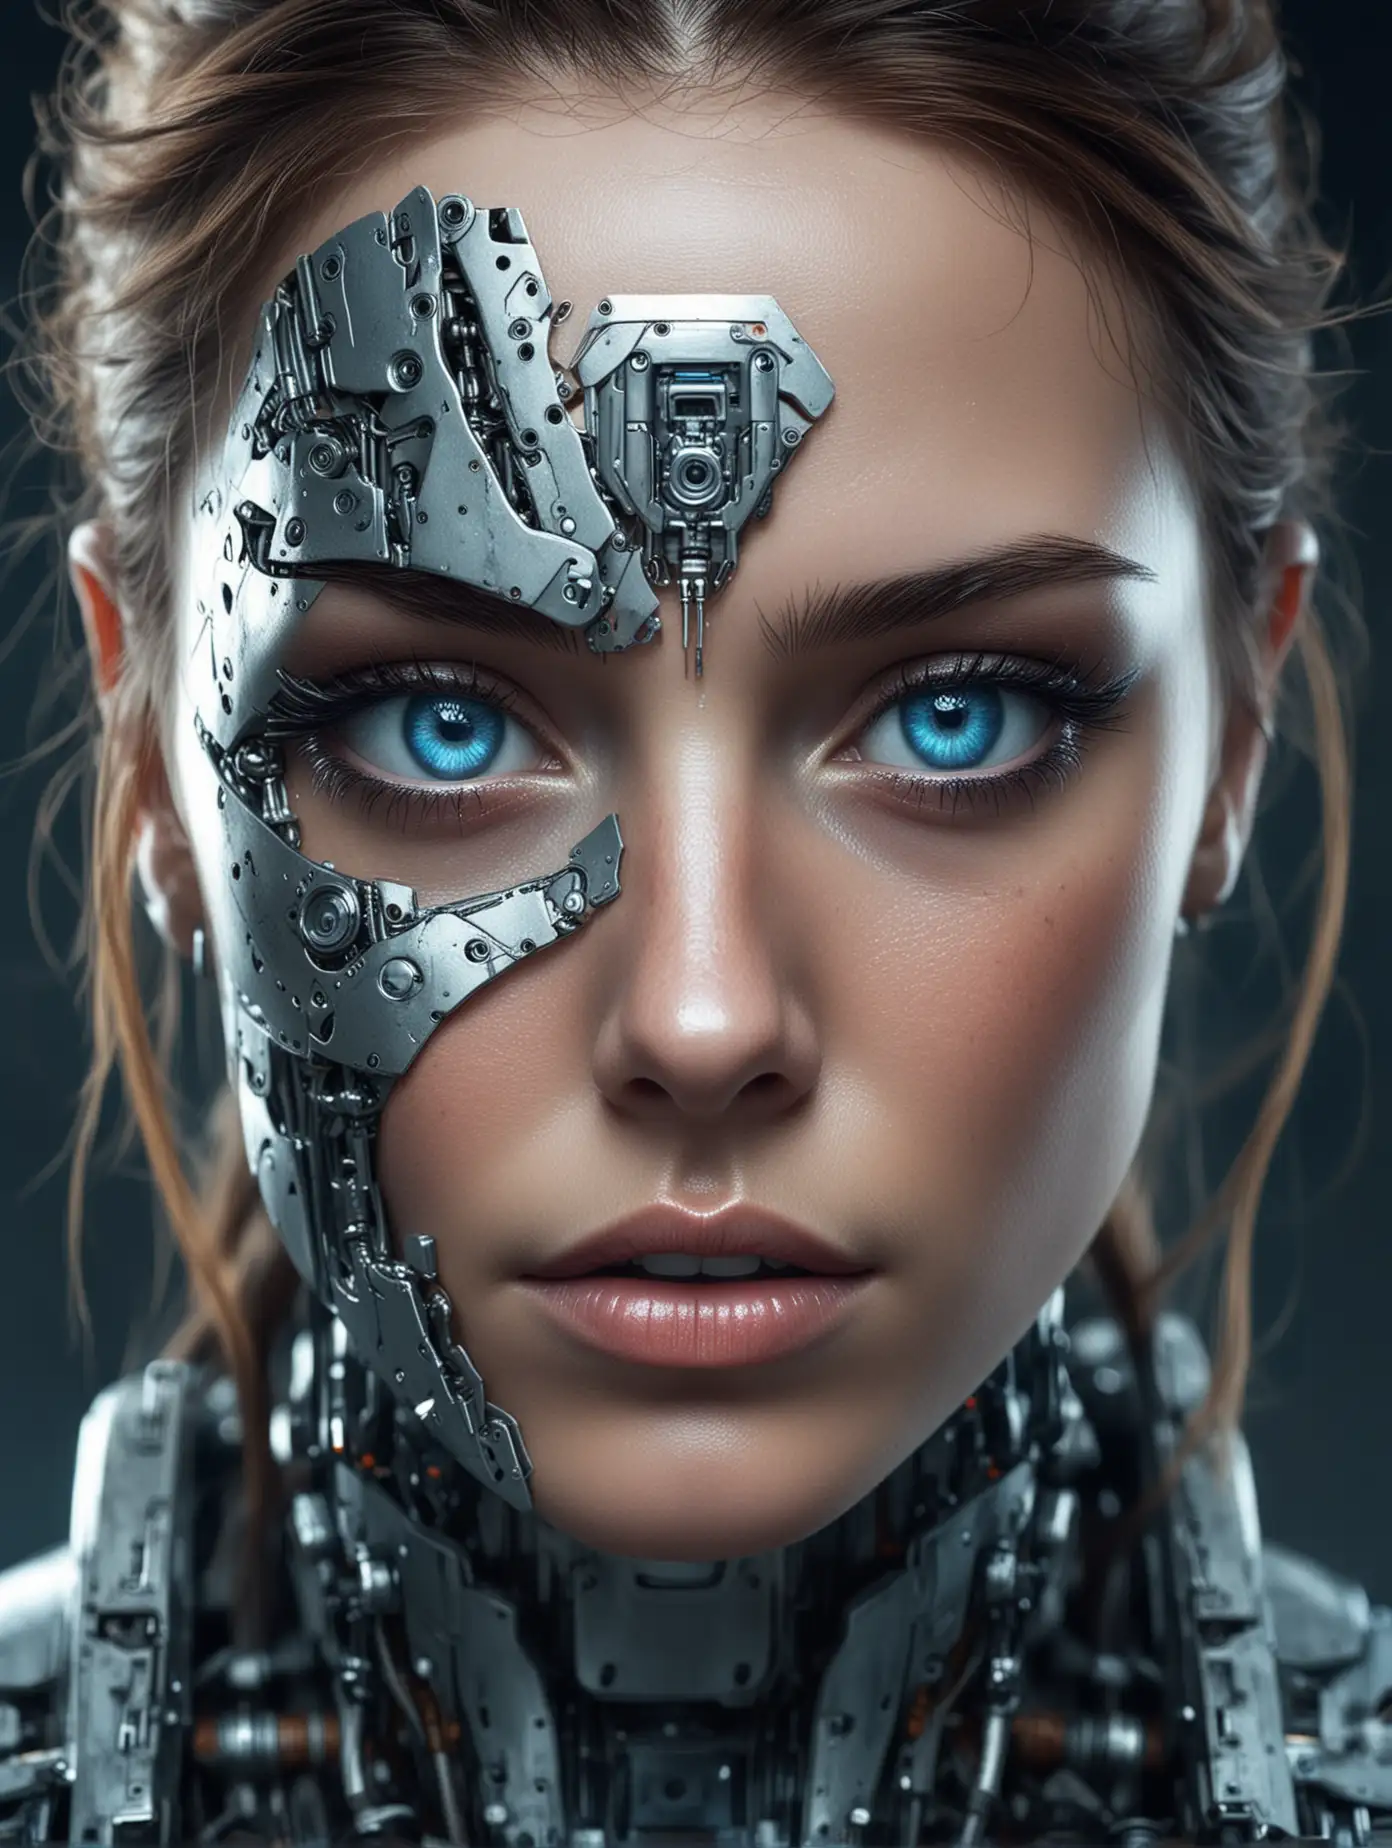 Futuristic Warrior Woman Fusion of Human and Machine in Mystical Ambiance